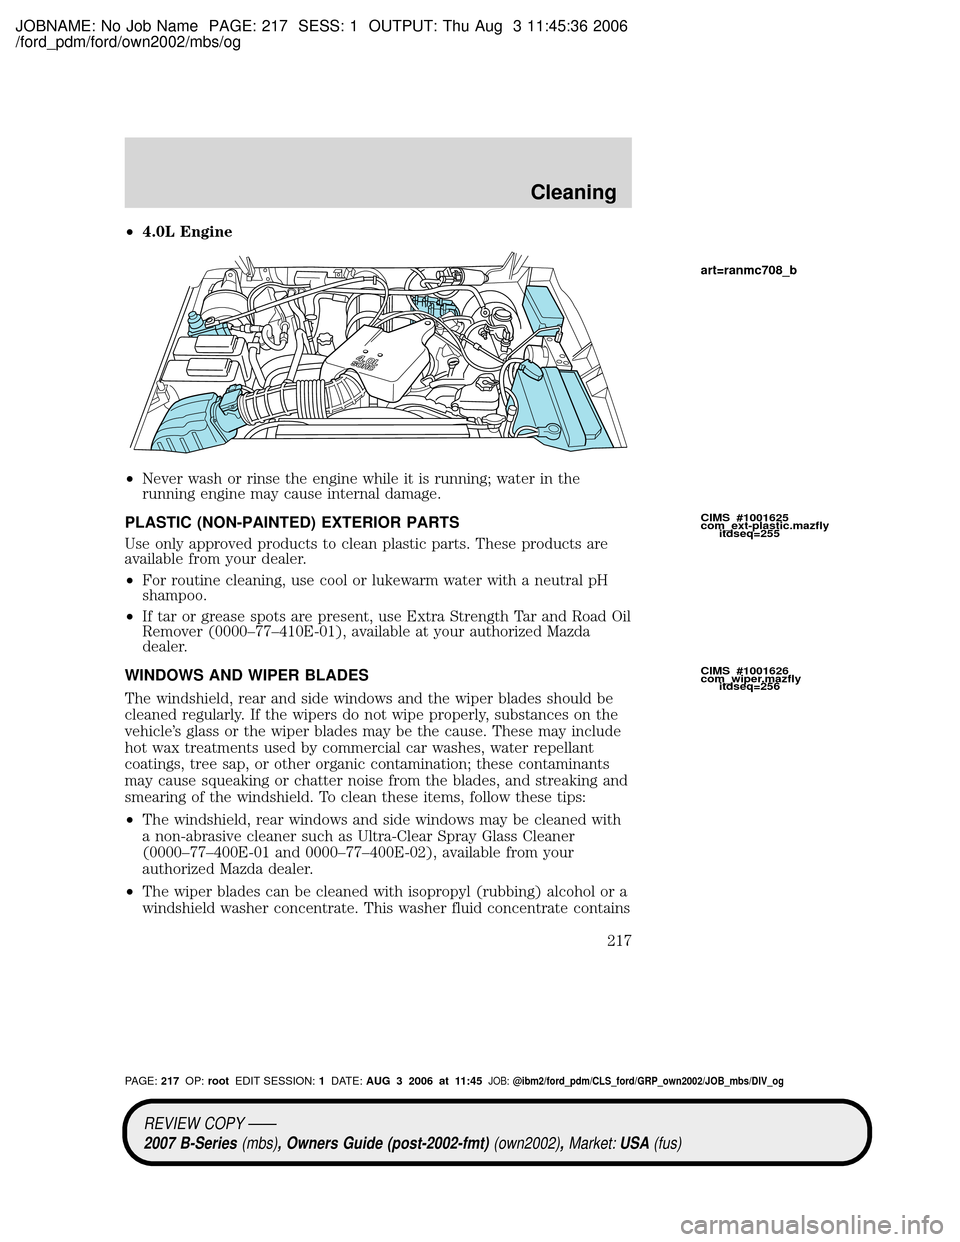 MAZDA MODEL B2300 TRUCK 2007  Owners Manual (in English) JOBNAME: No Job Name PAGE: 217 SESS: 1 OUTPUT: Thu Aug 3 11:45:36 2006
/ford_pdm/ford/own2002/mbs/og
²4.0L Engine
²Never wash or rinse the engine while it is running; water in the
running engine may